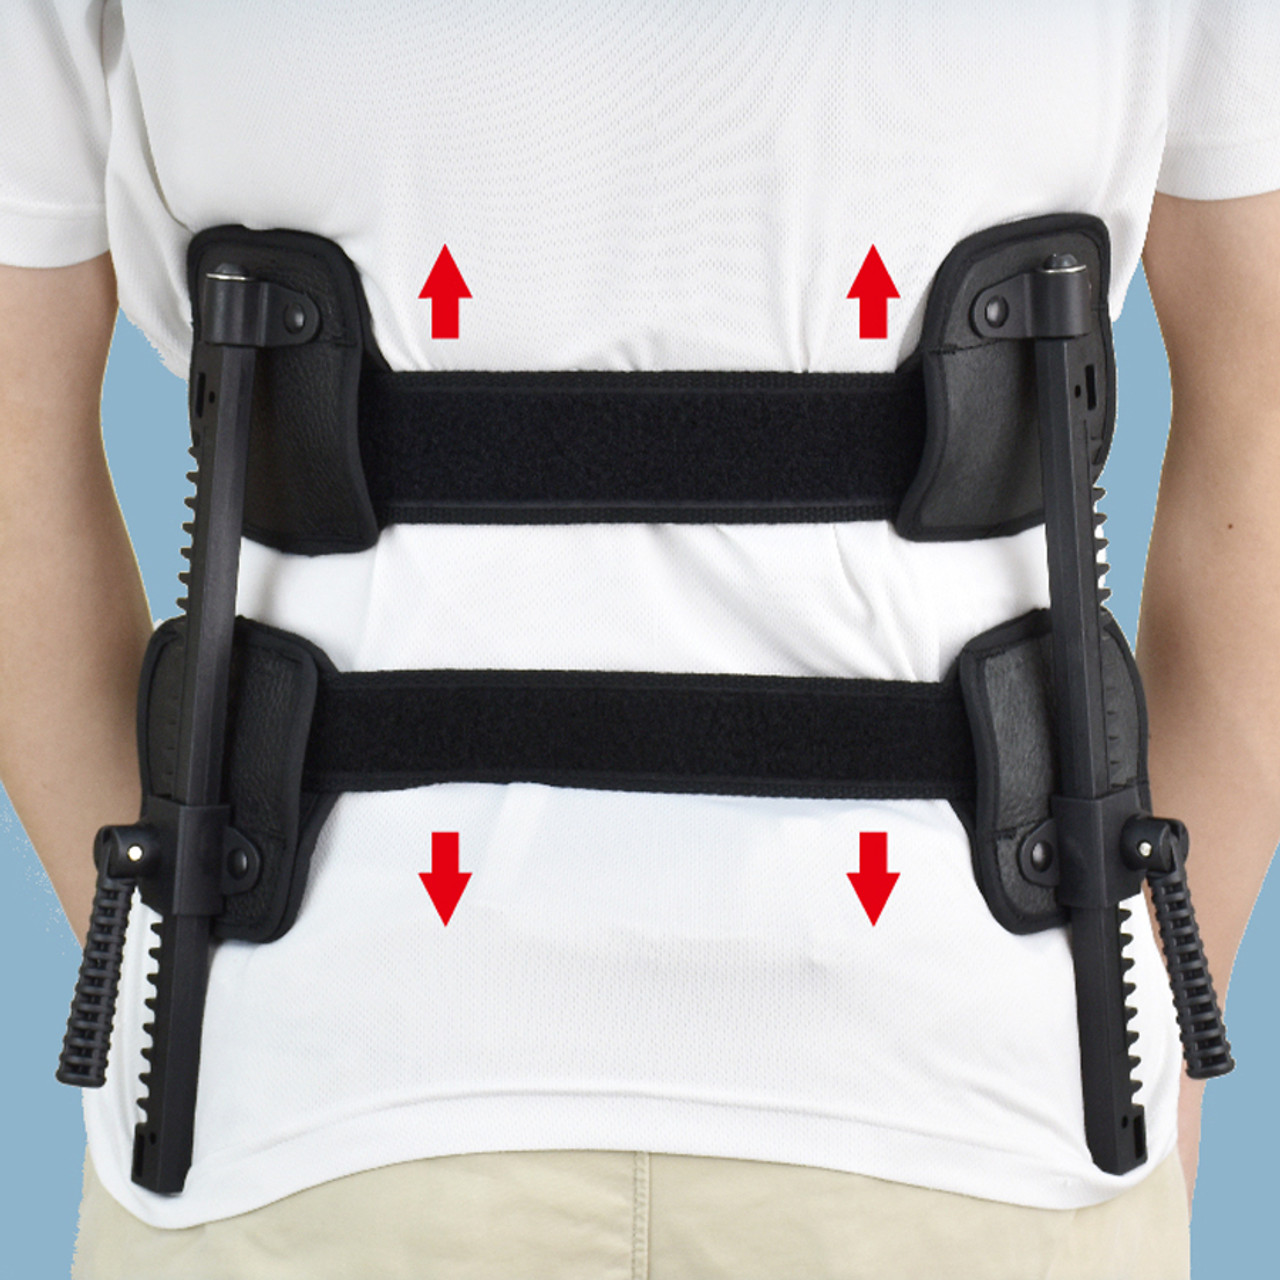 Orthoactive 5440 Mobile Spinal Traction Medium